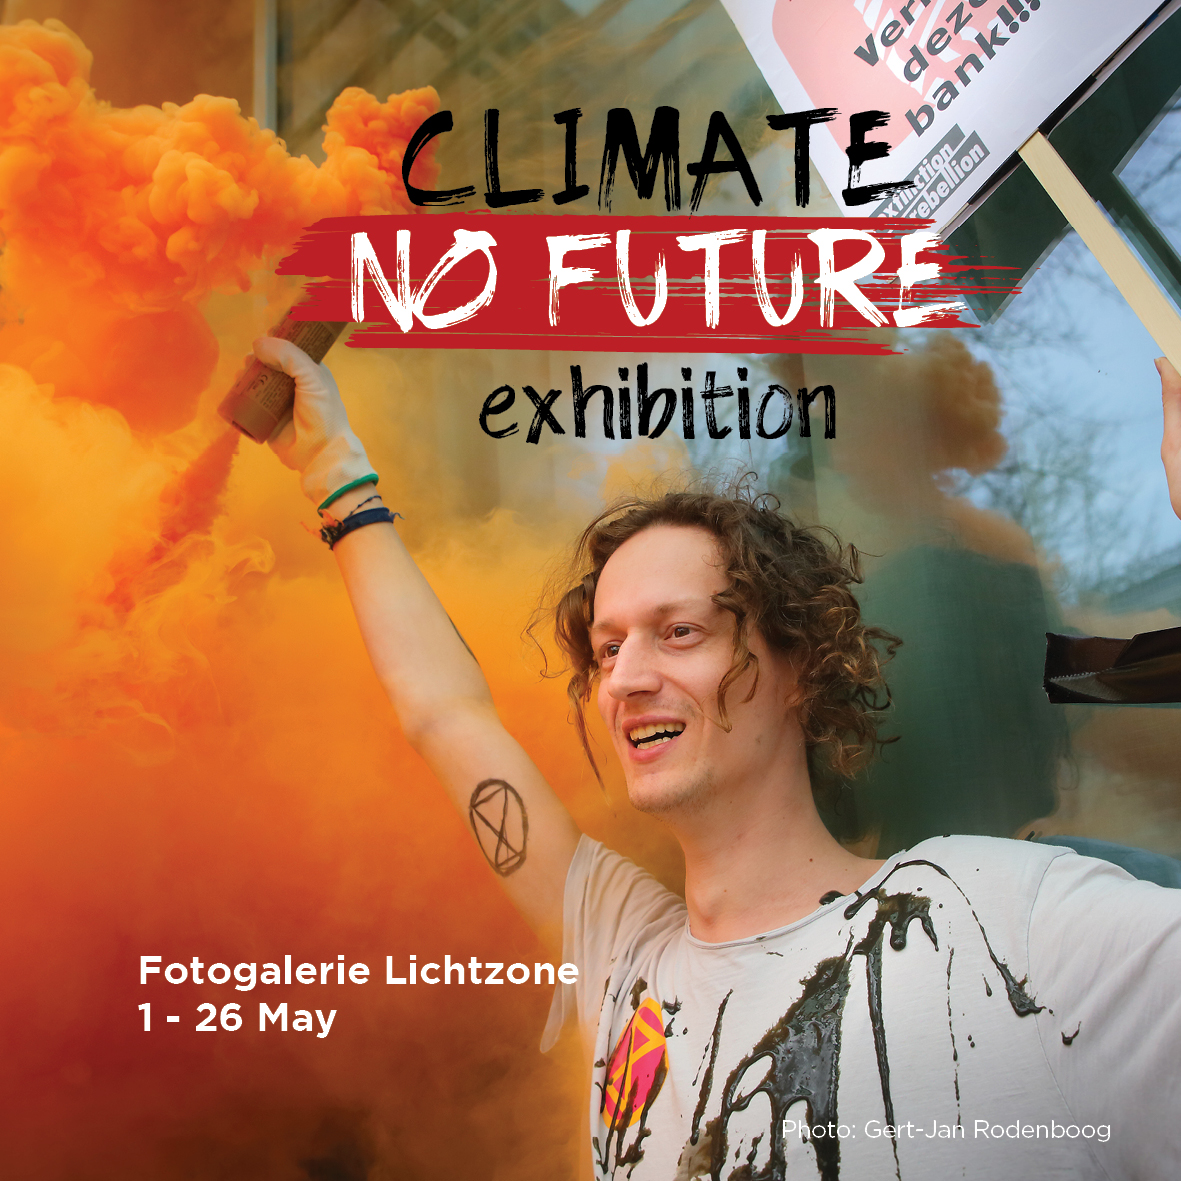 Come to Groningen! David Shim and I in collaboration with @NFP_Groningen have organized the photo exhibition 'Climate No Future', which explores the climate crisis through the eyes of activists. The exhibition takes place at lichtzone.nl in Groningen from 1 to 26 May